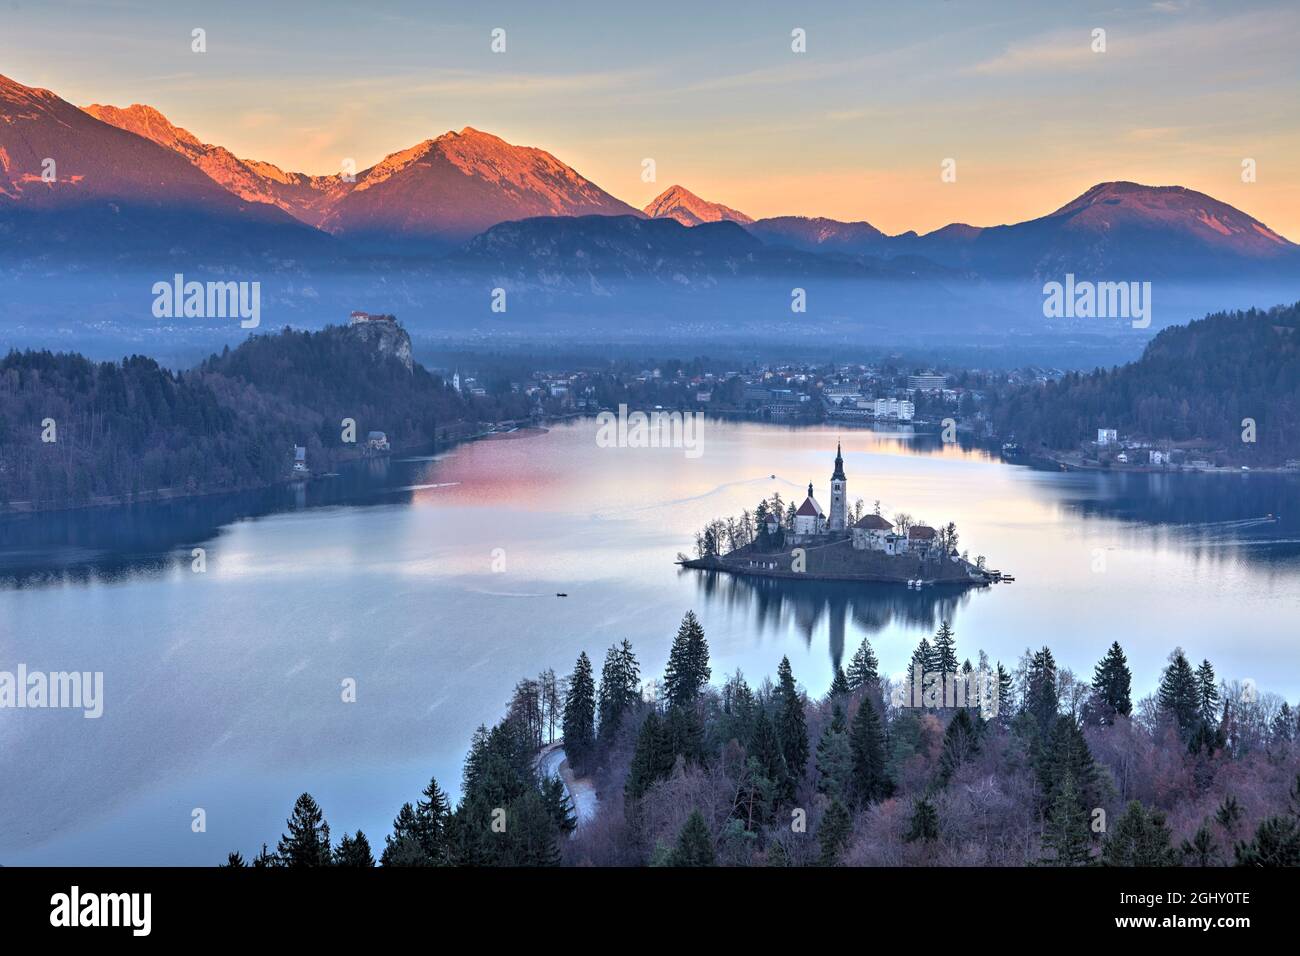 Elevated view of Lake Bled and the Church of Mary the Queen, located on a small island in the middle of the lake, Bled, Slovenia Stock Photo